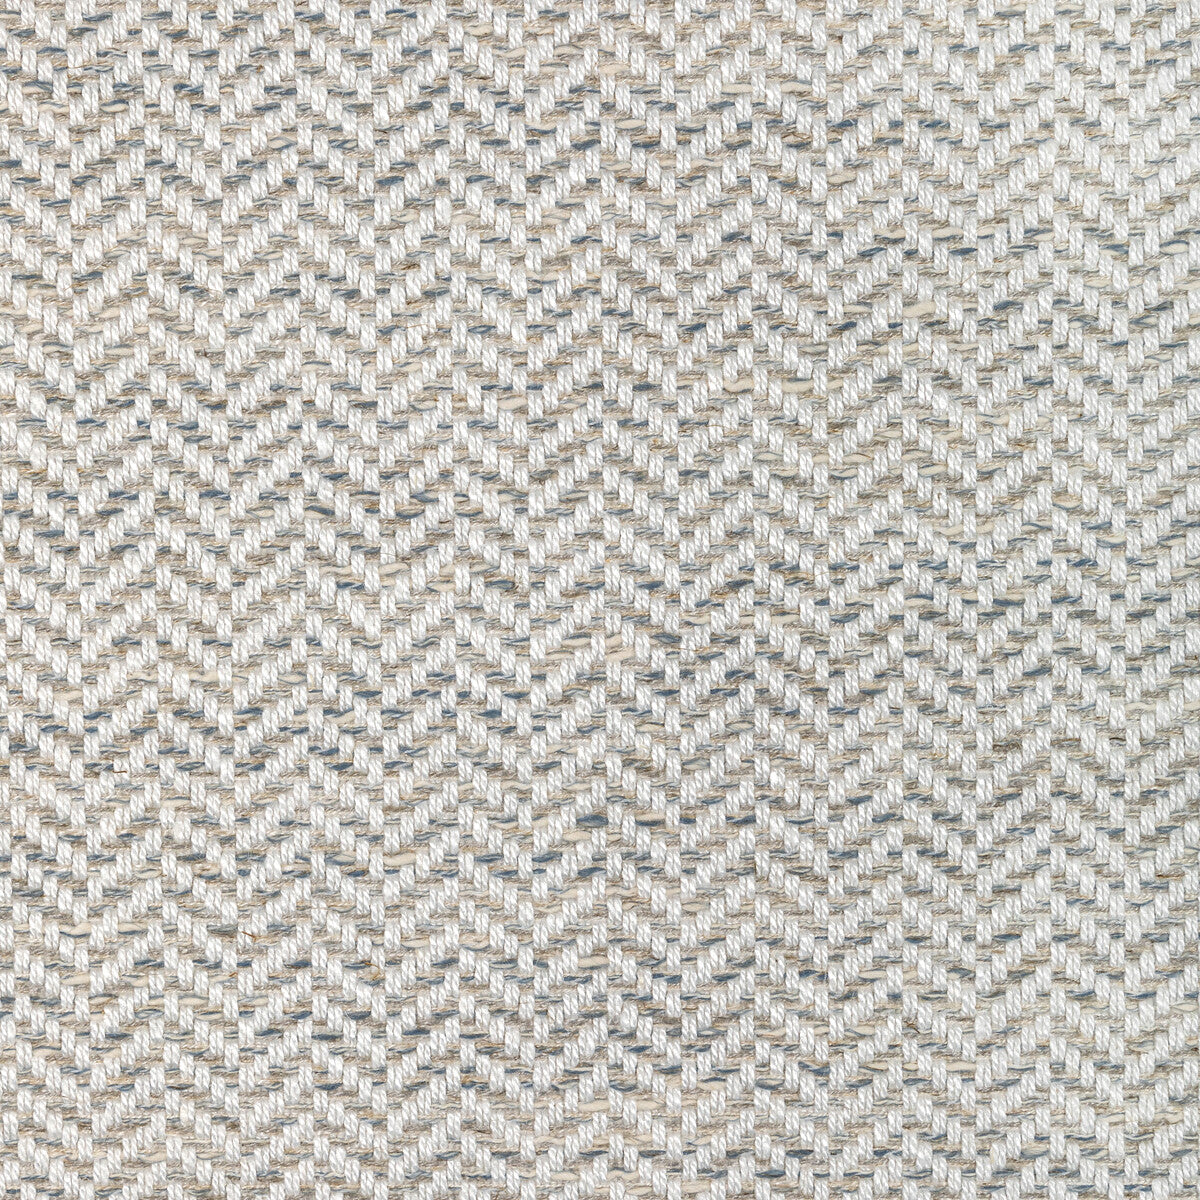 Verve Weave fabric in chambray color - pattern 36358.1516.0 - by Kravet Couture in the Corey Damen Jenkins Trad Nouveau collection